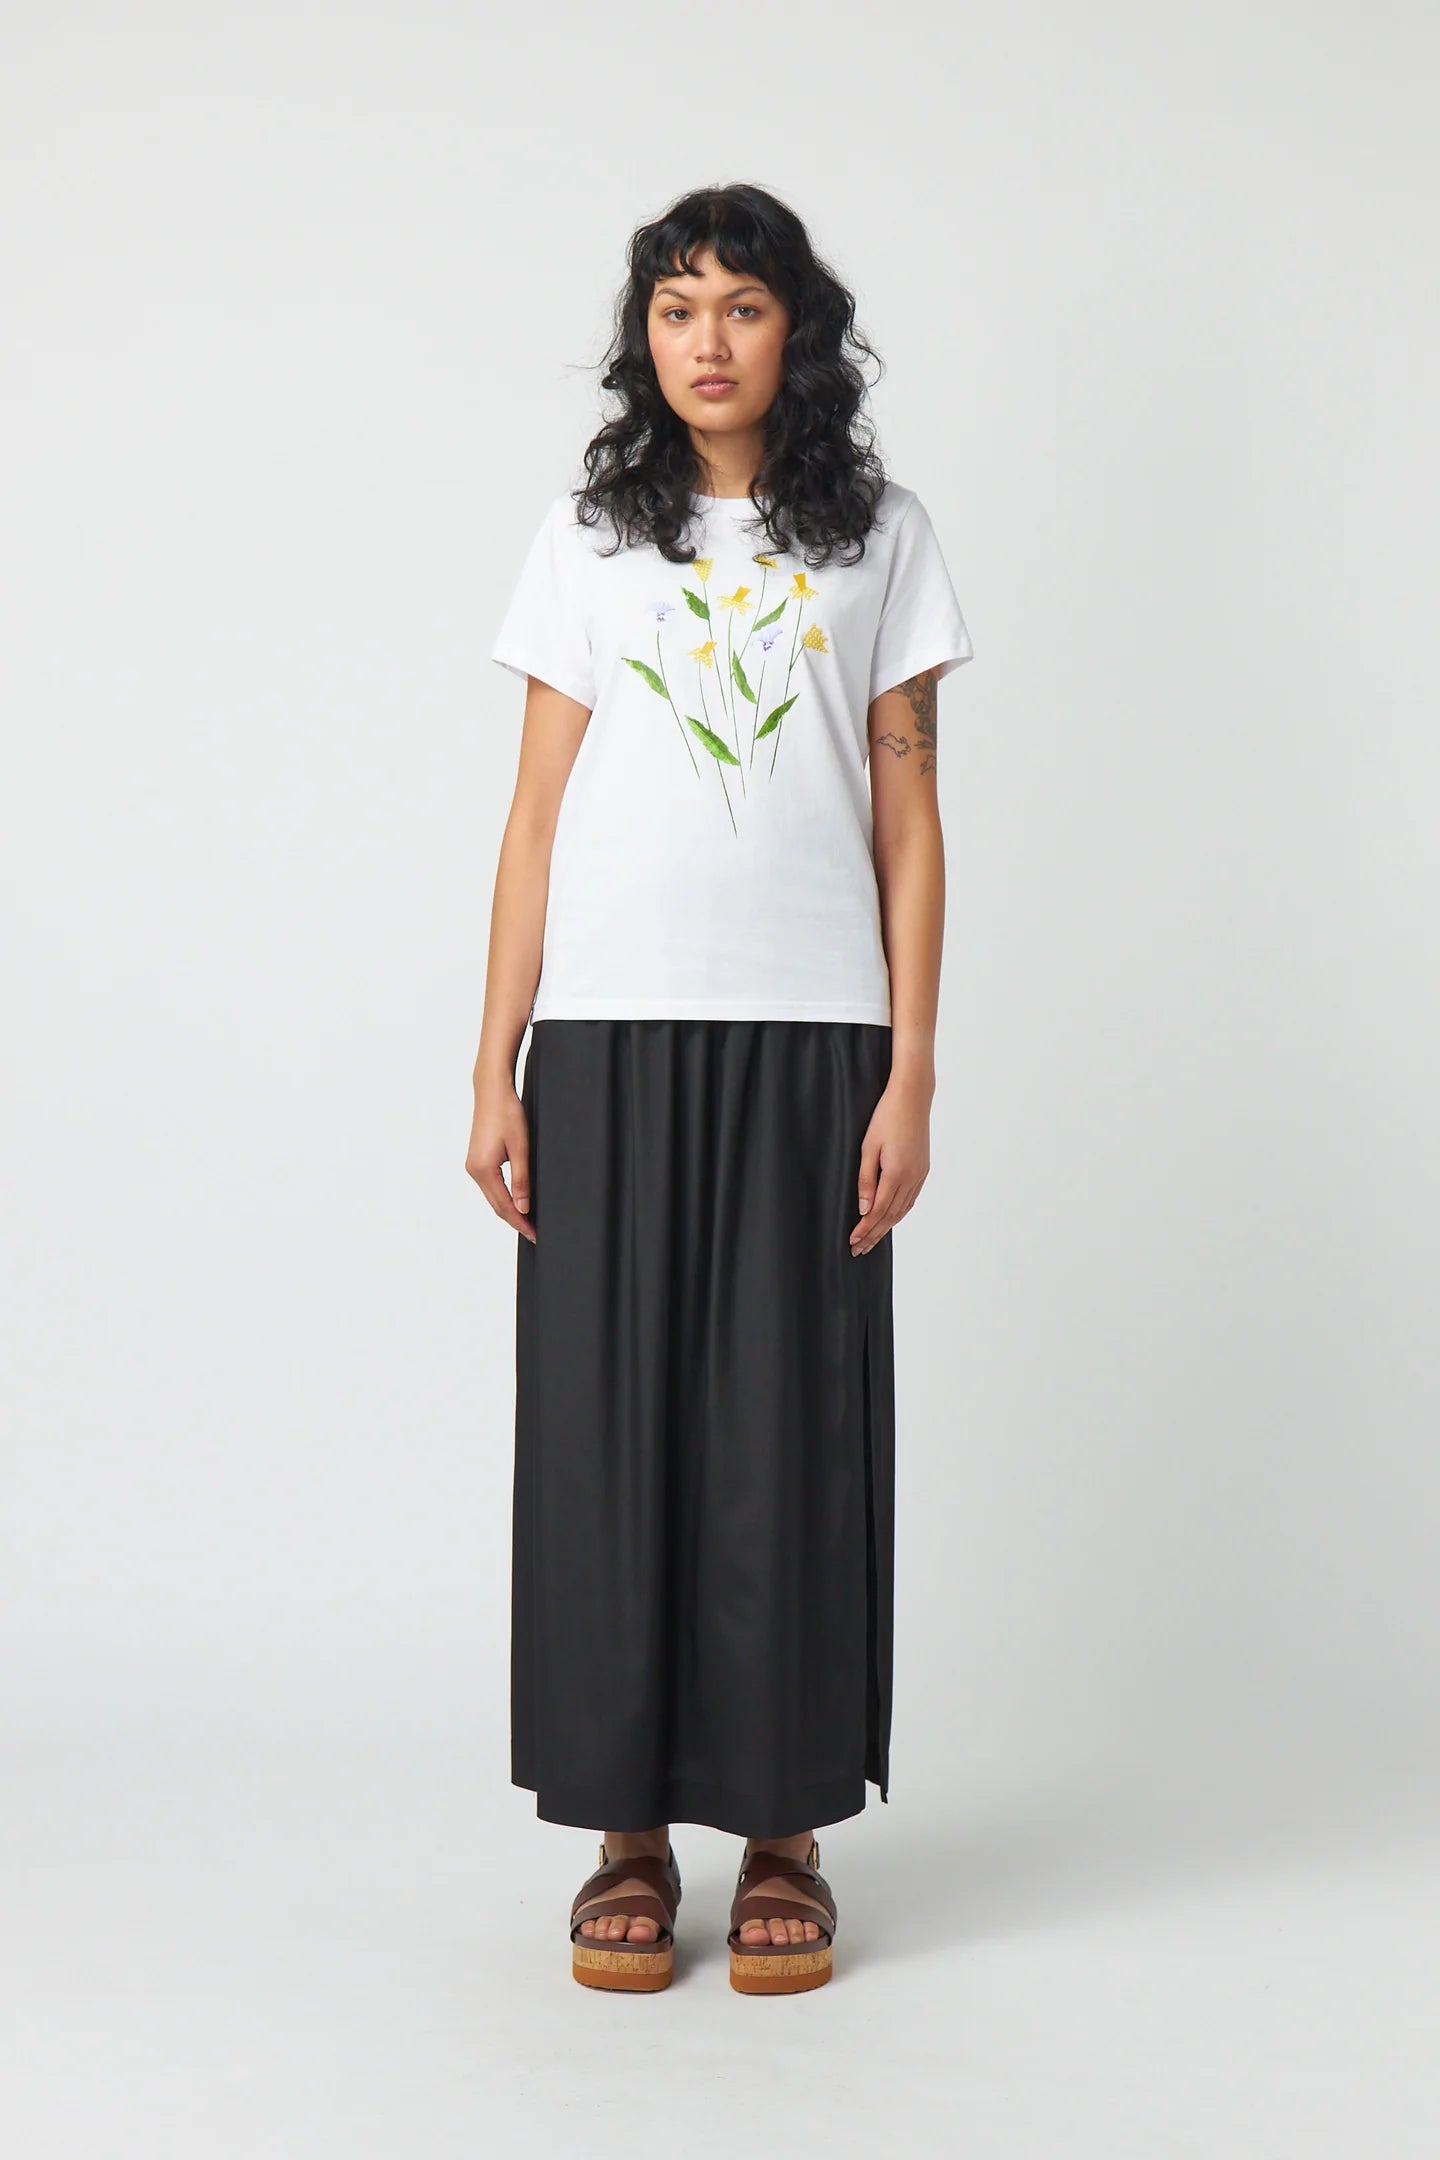 Sylvester Daffodils Tee - White